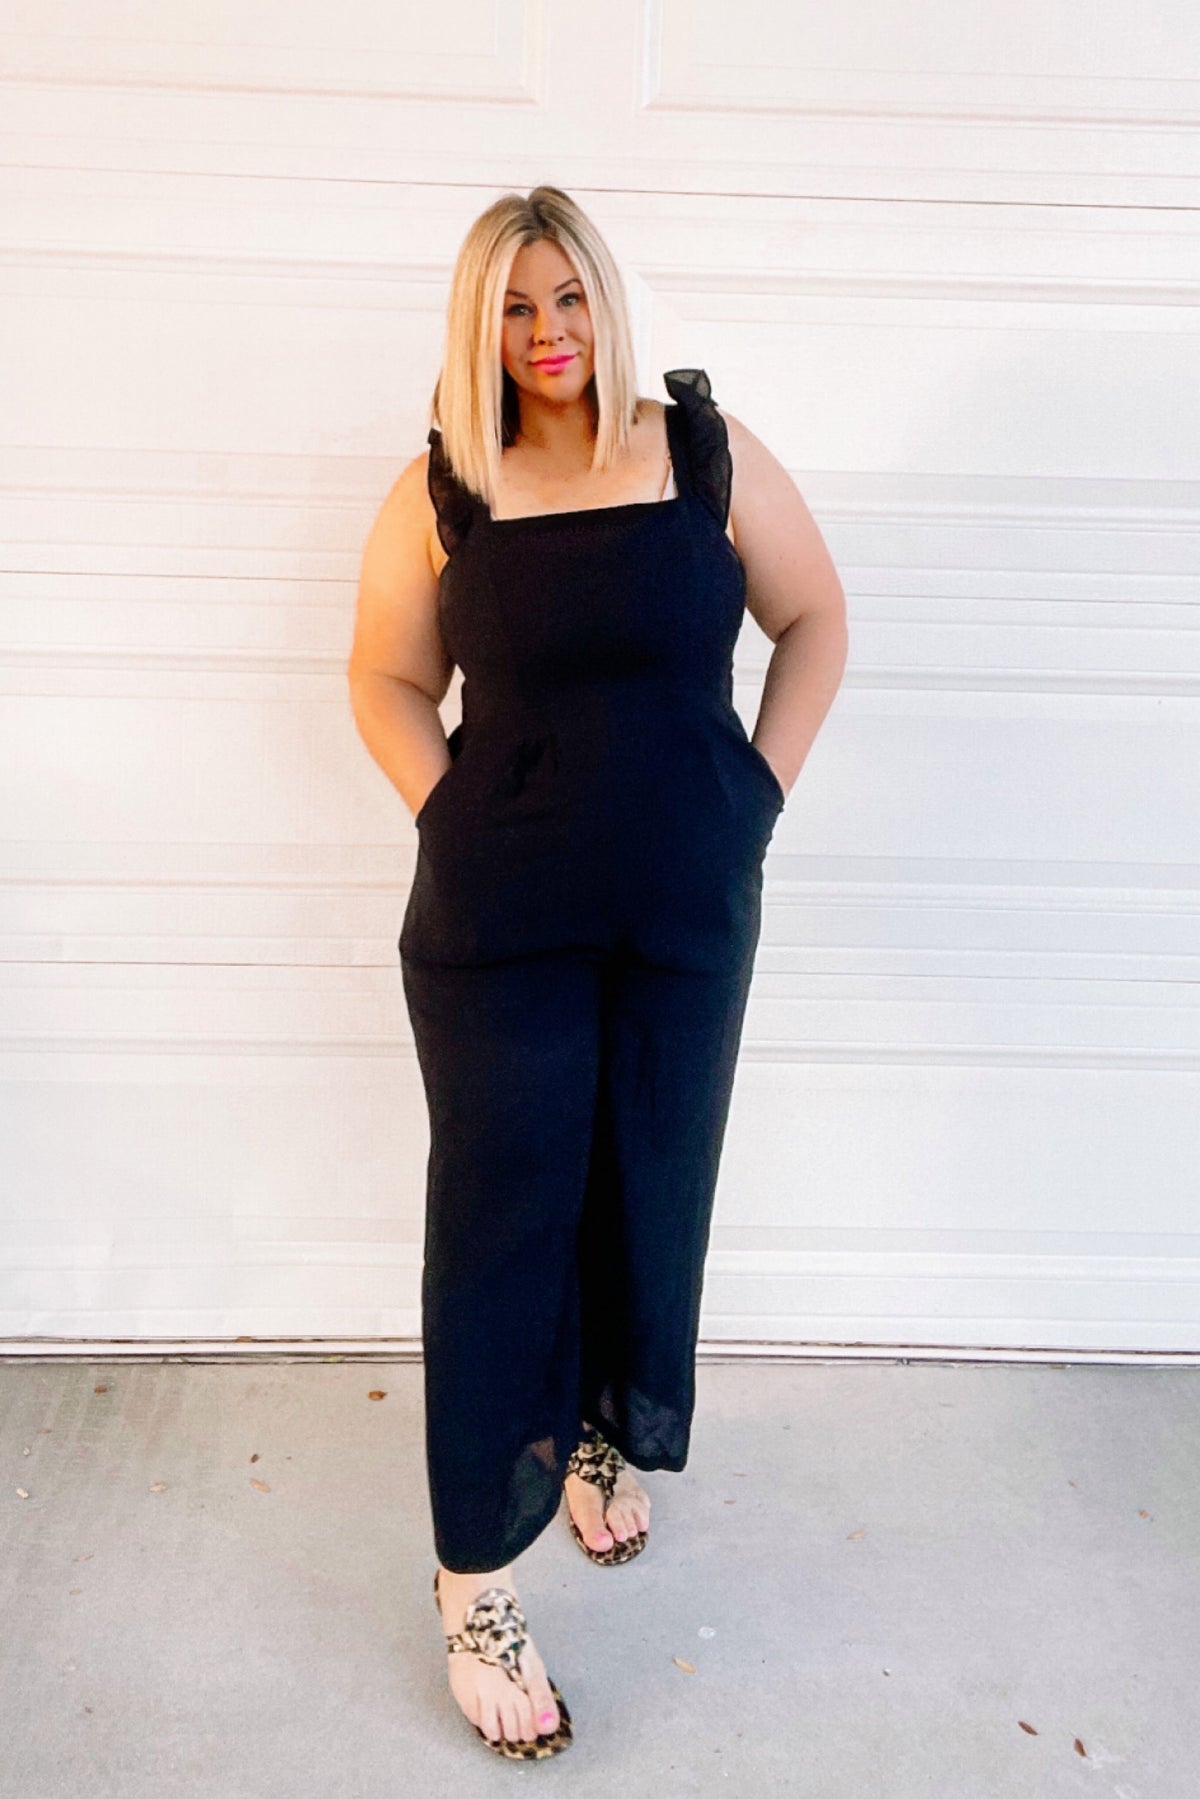 THE EVERYDAY BLACK JUMPSUIT